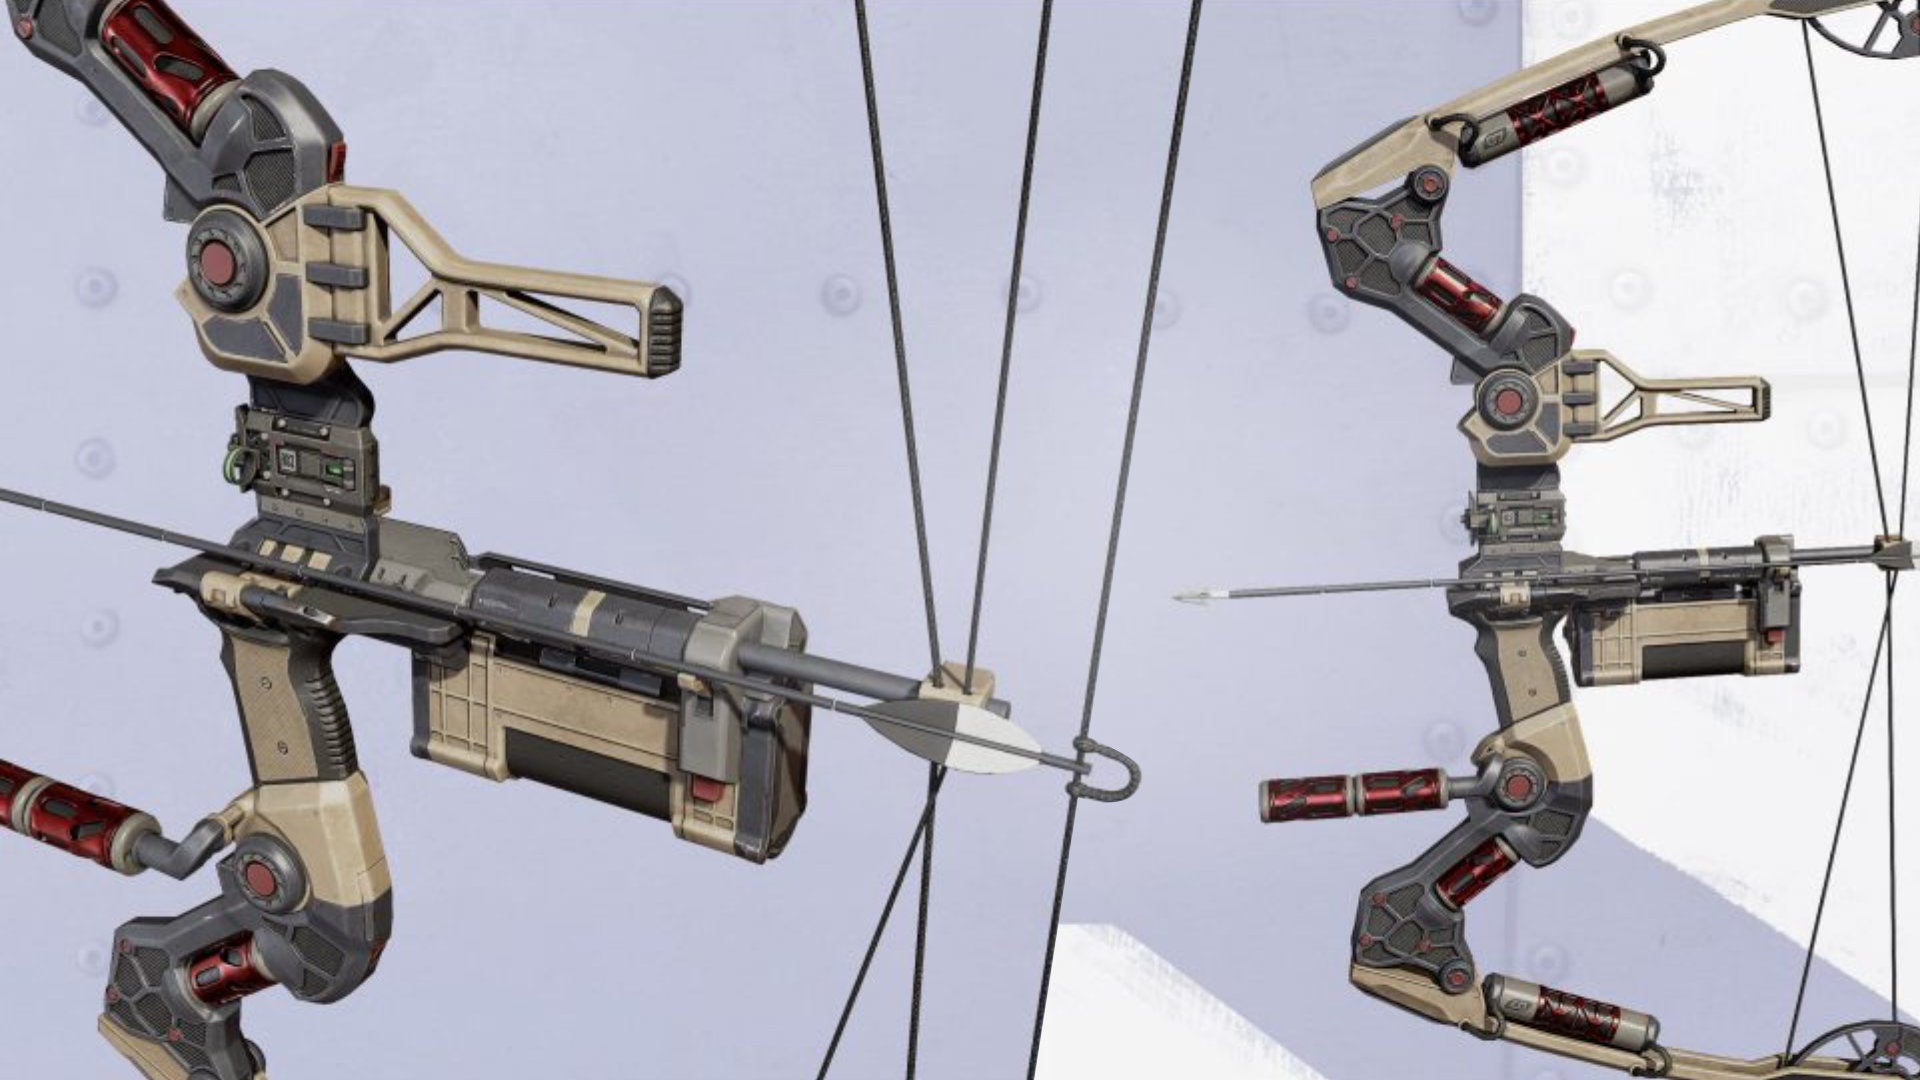 Promotional Apex Legends art of the Bocek Bow, Season 9's addition to the game's weapons roster.